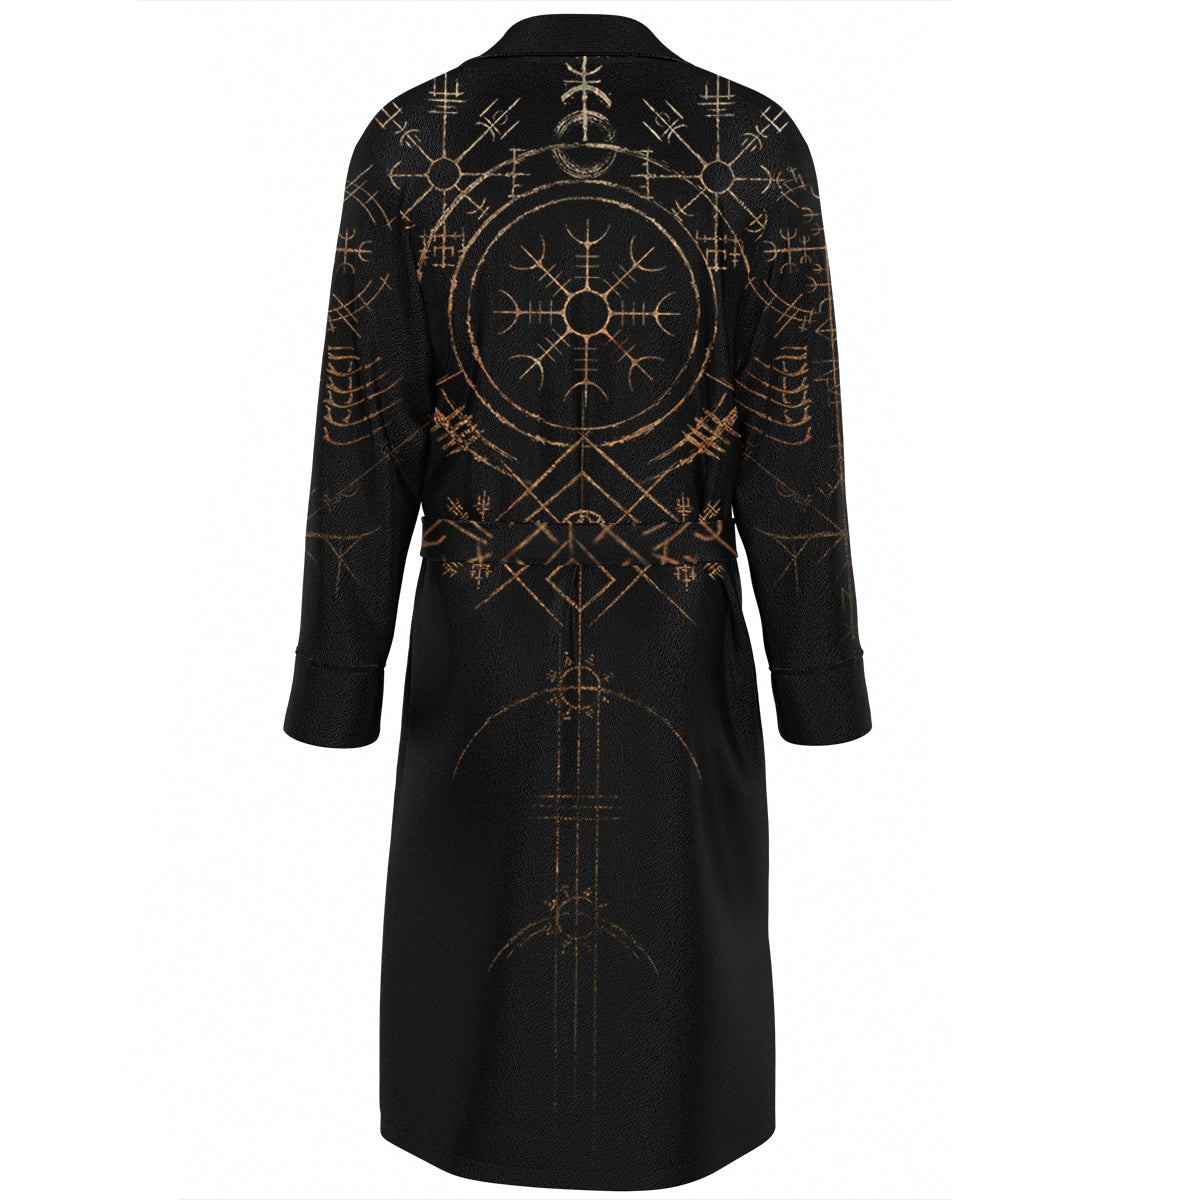 The Stave Robe